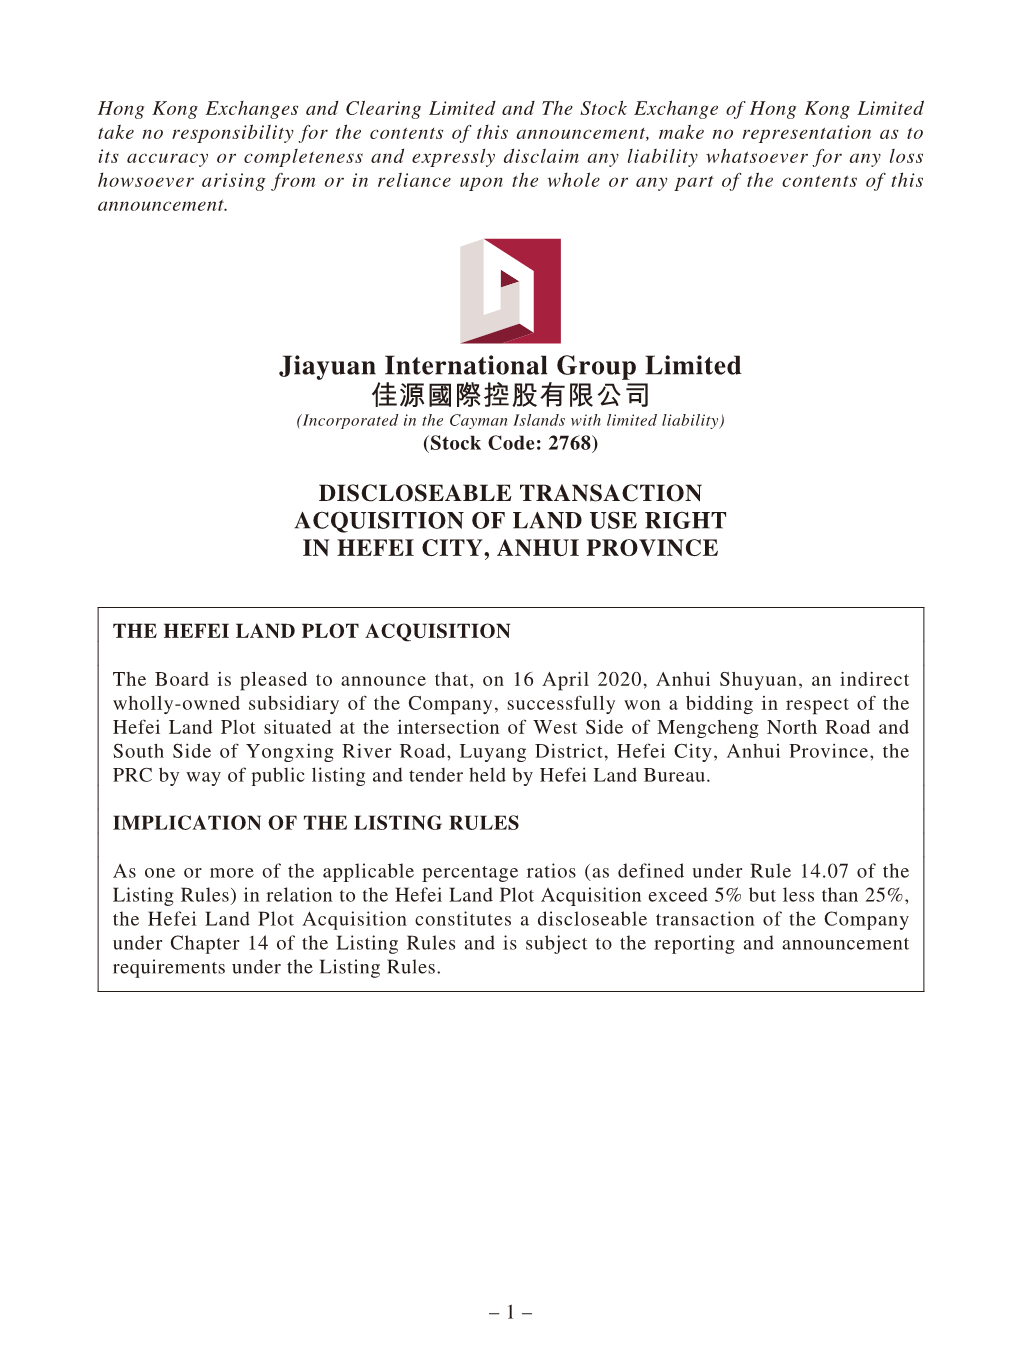 Jiayuan International Group Limited 佳源國際控股有限公司 (Incorporated in the Cayman Islands with Limited Liability) (Stock Code: 2768)